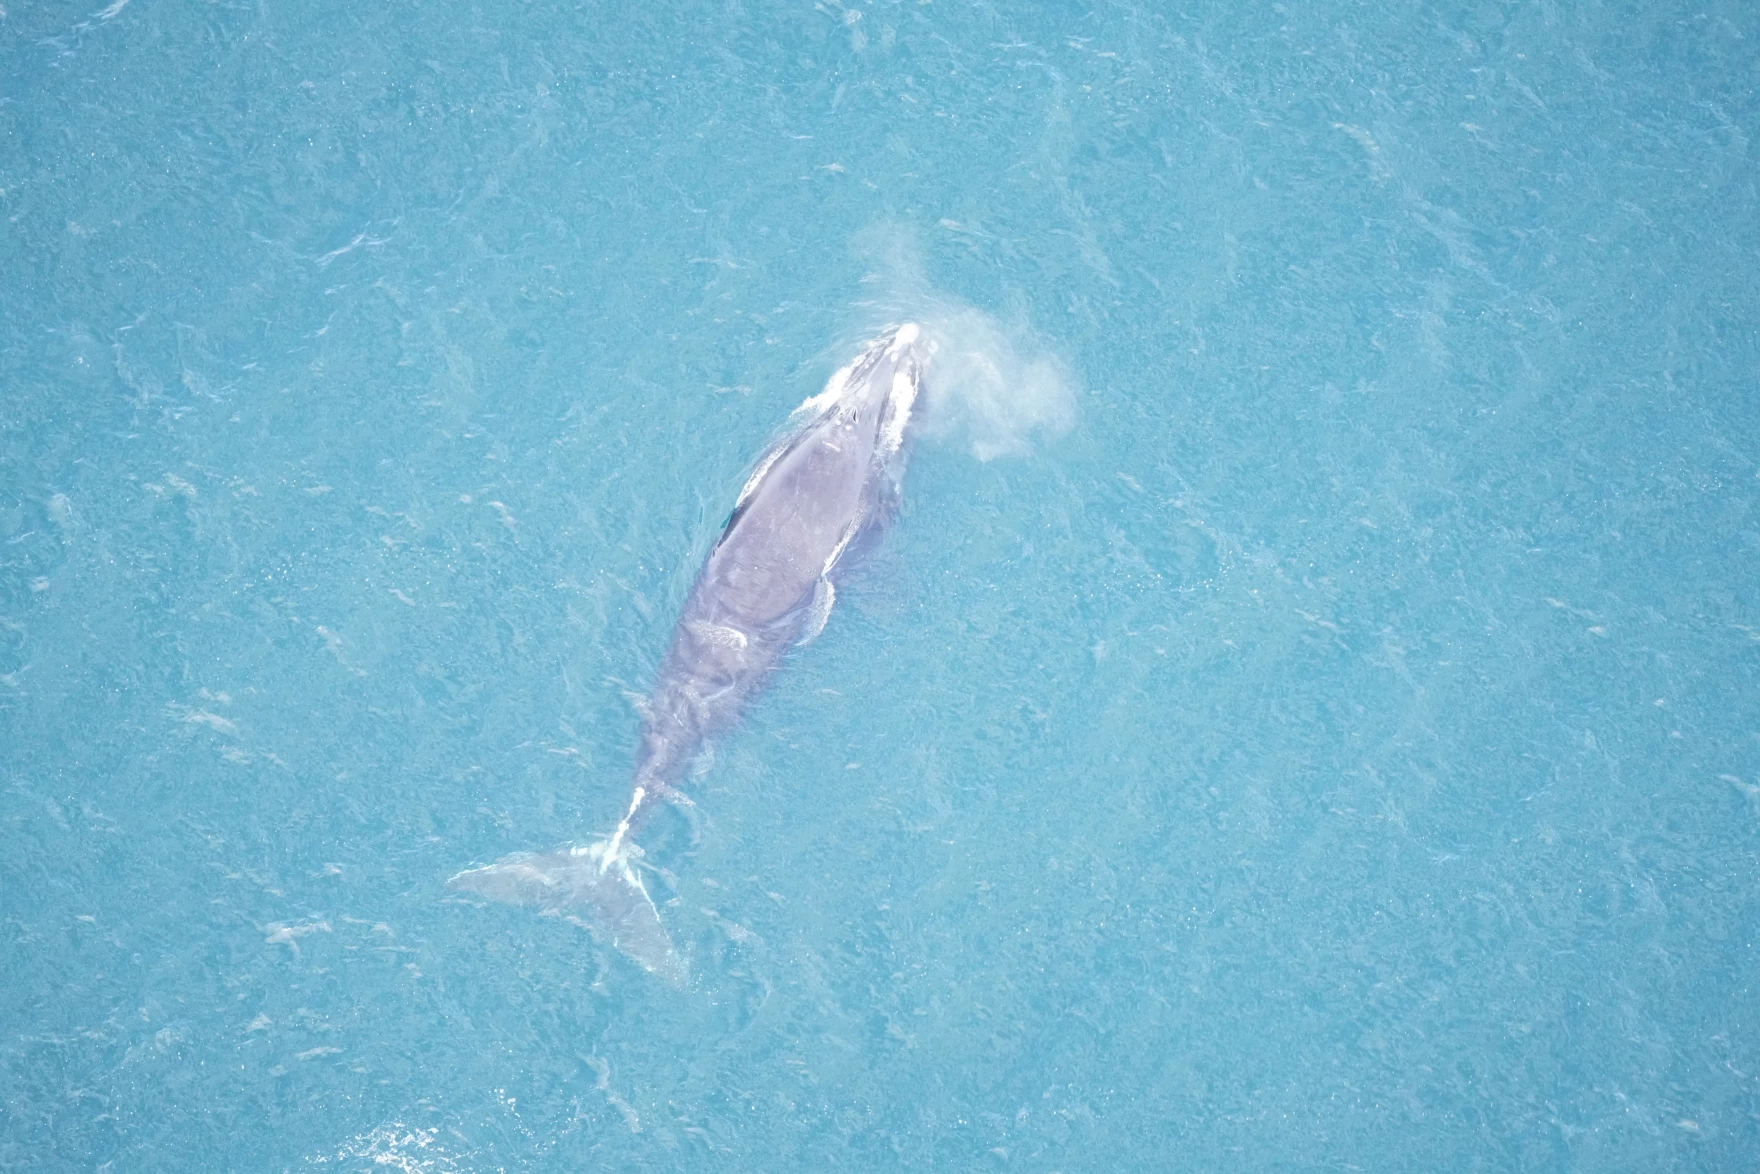 The New England Aquarium's aerial survey team took this photo of Nimbus on March 10, 2023 from the window of a small plane.